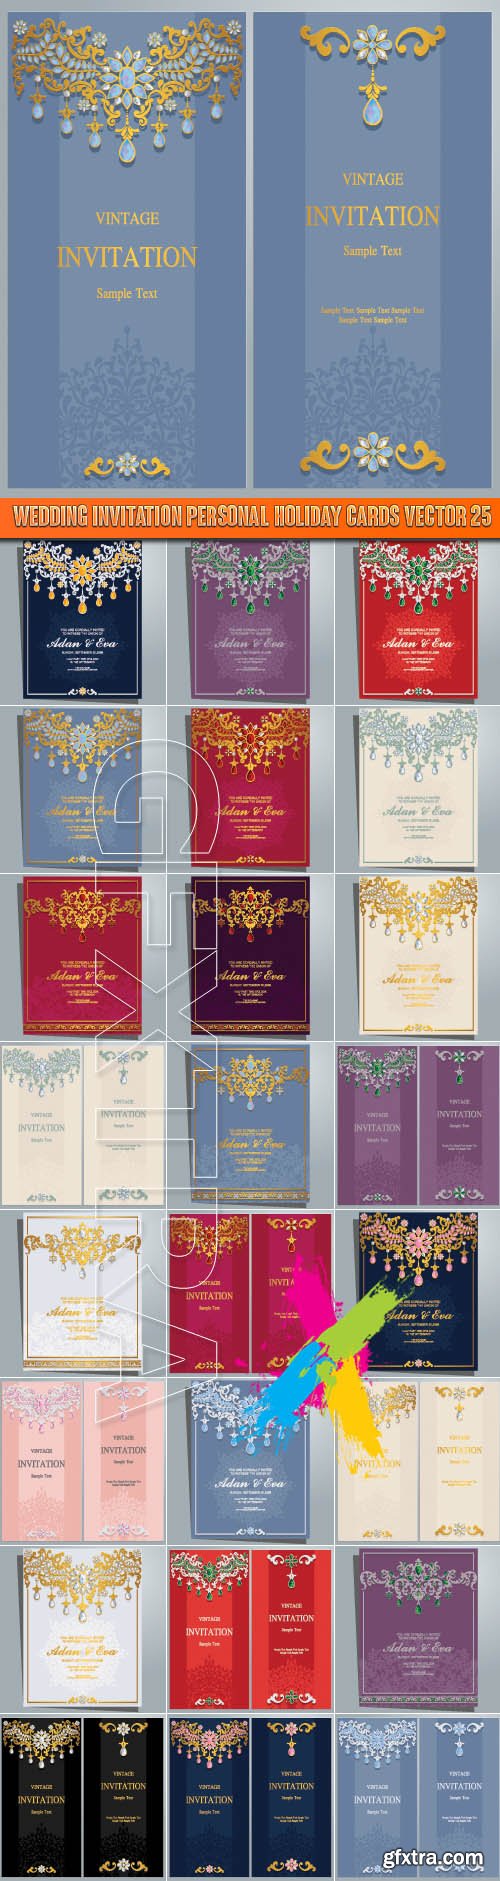 Wedding invitation personal holiday cards vector 25